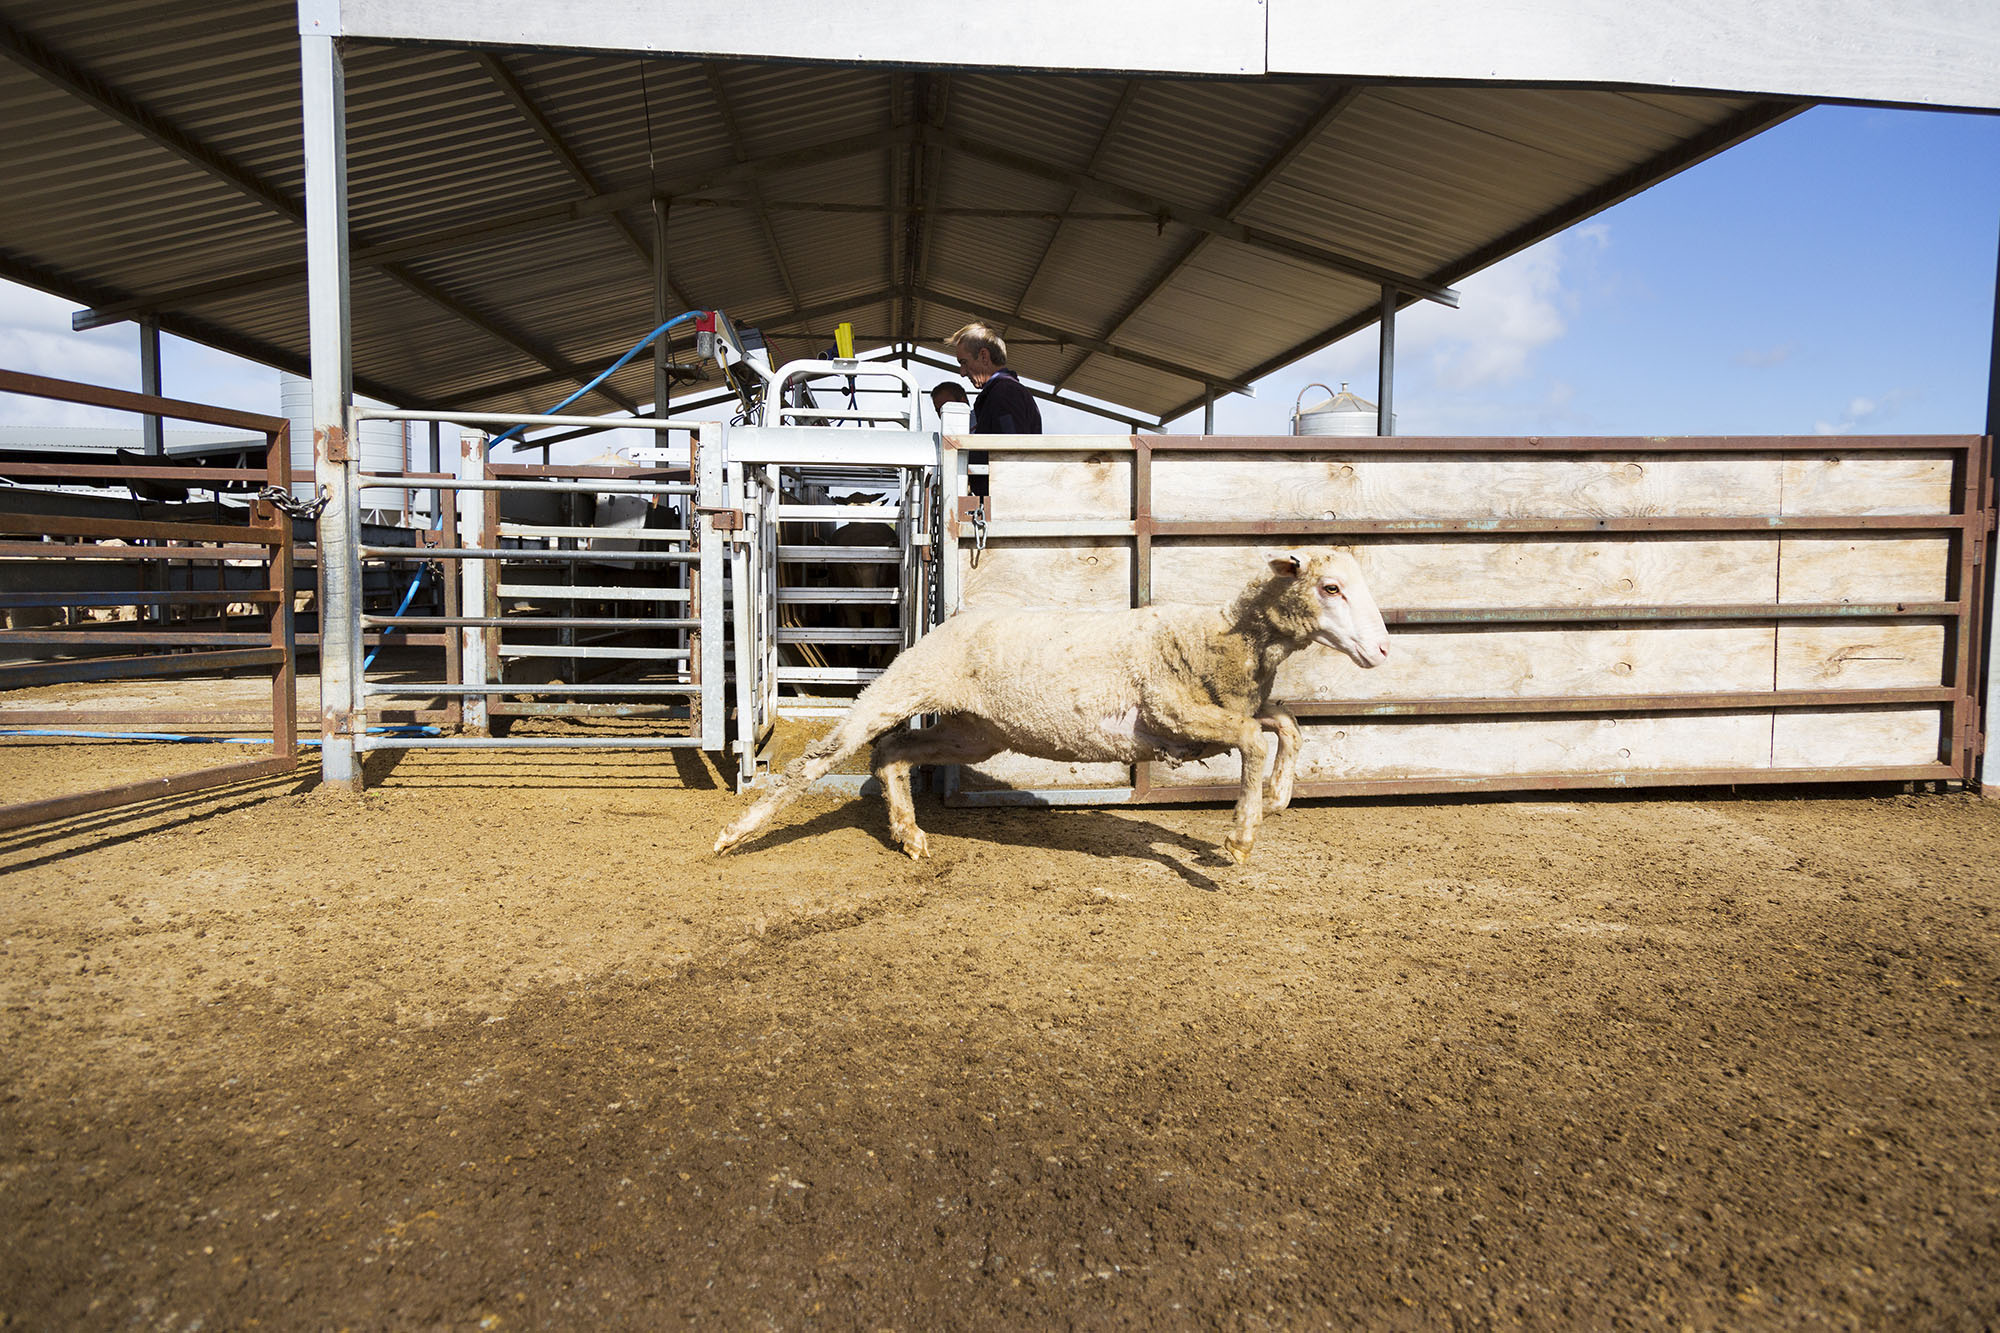 Sheep dart across the yards of an export facility in Western Australia, where veterinarians like Holly Ludeman (above) monitor their health.